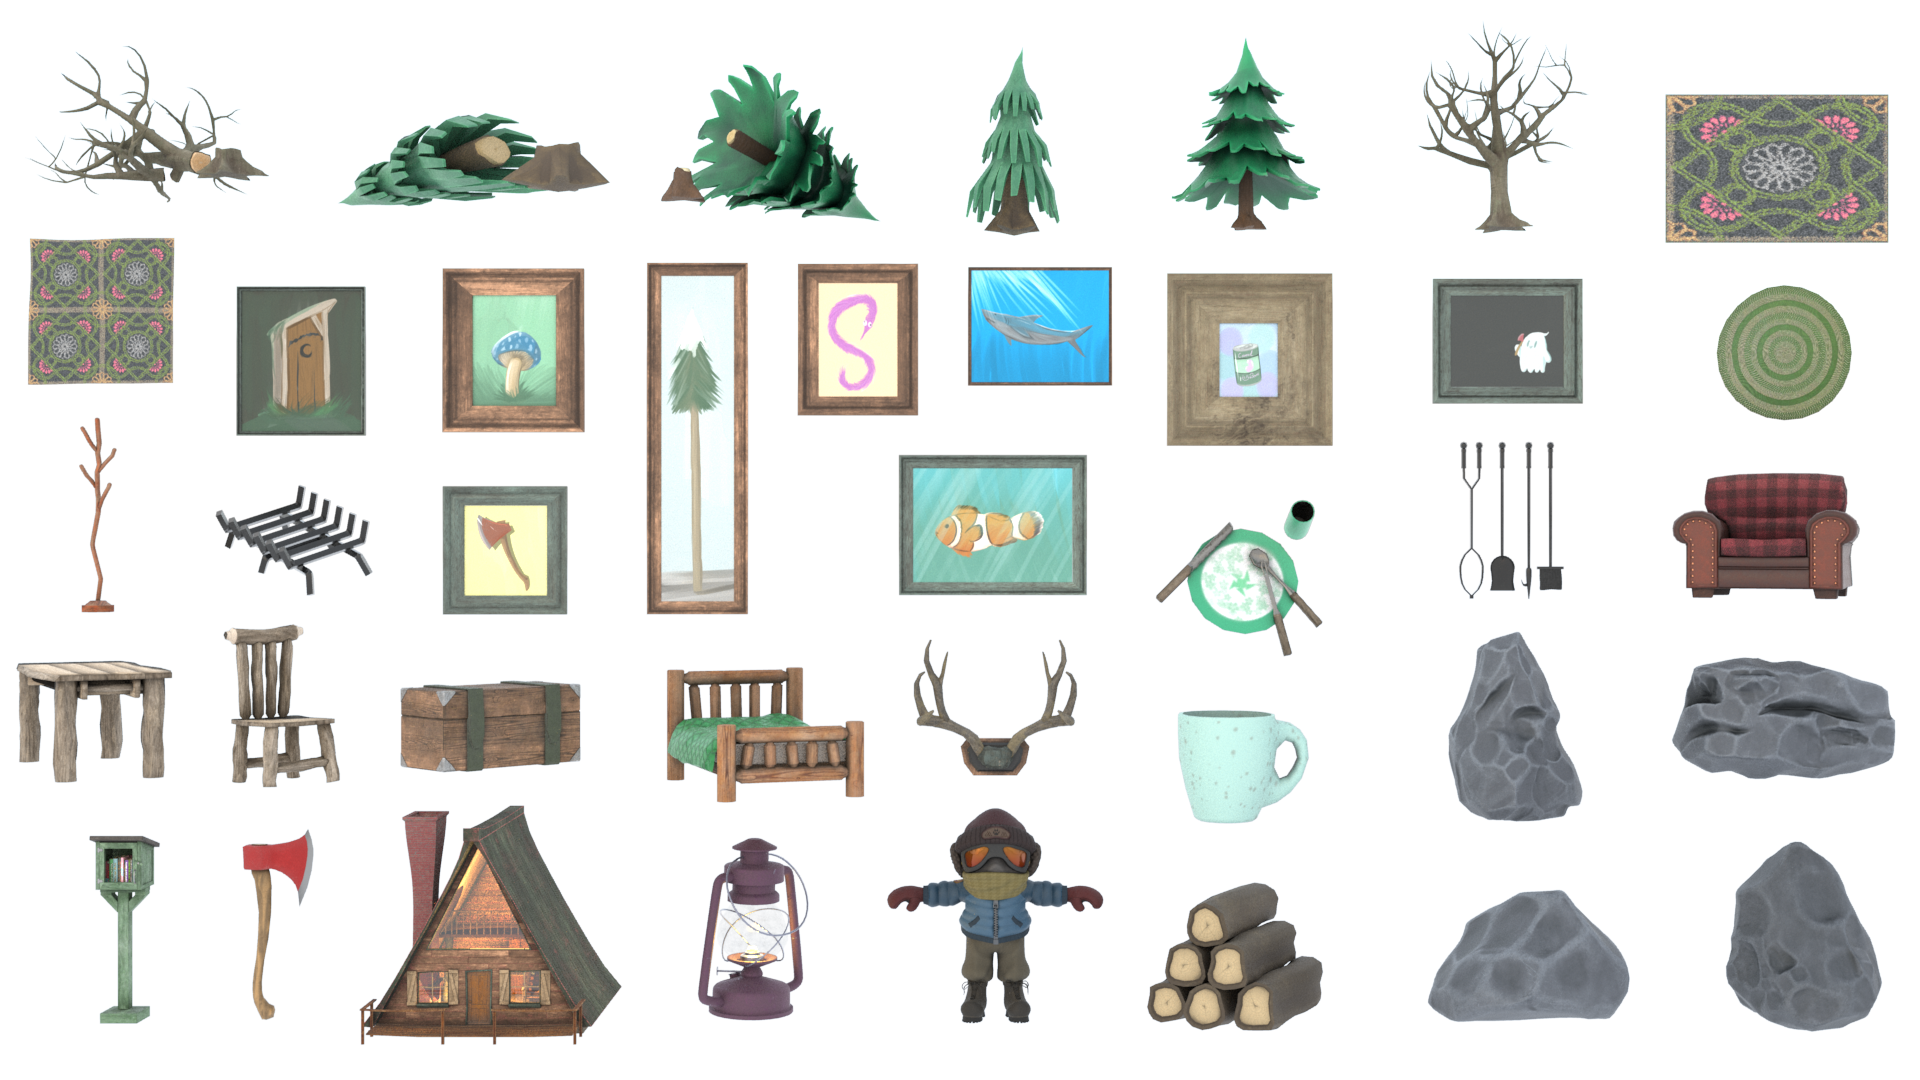 A collection of video game elements created by students for a course. The elements include different types and sizes of trees, artwork and household objects.